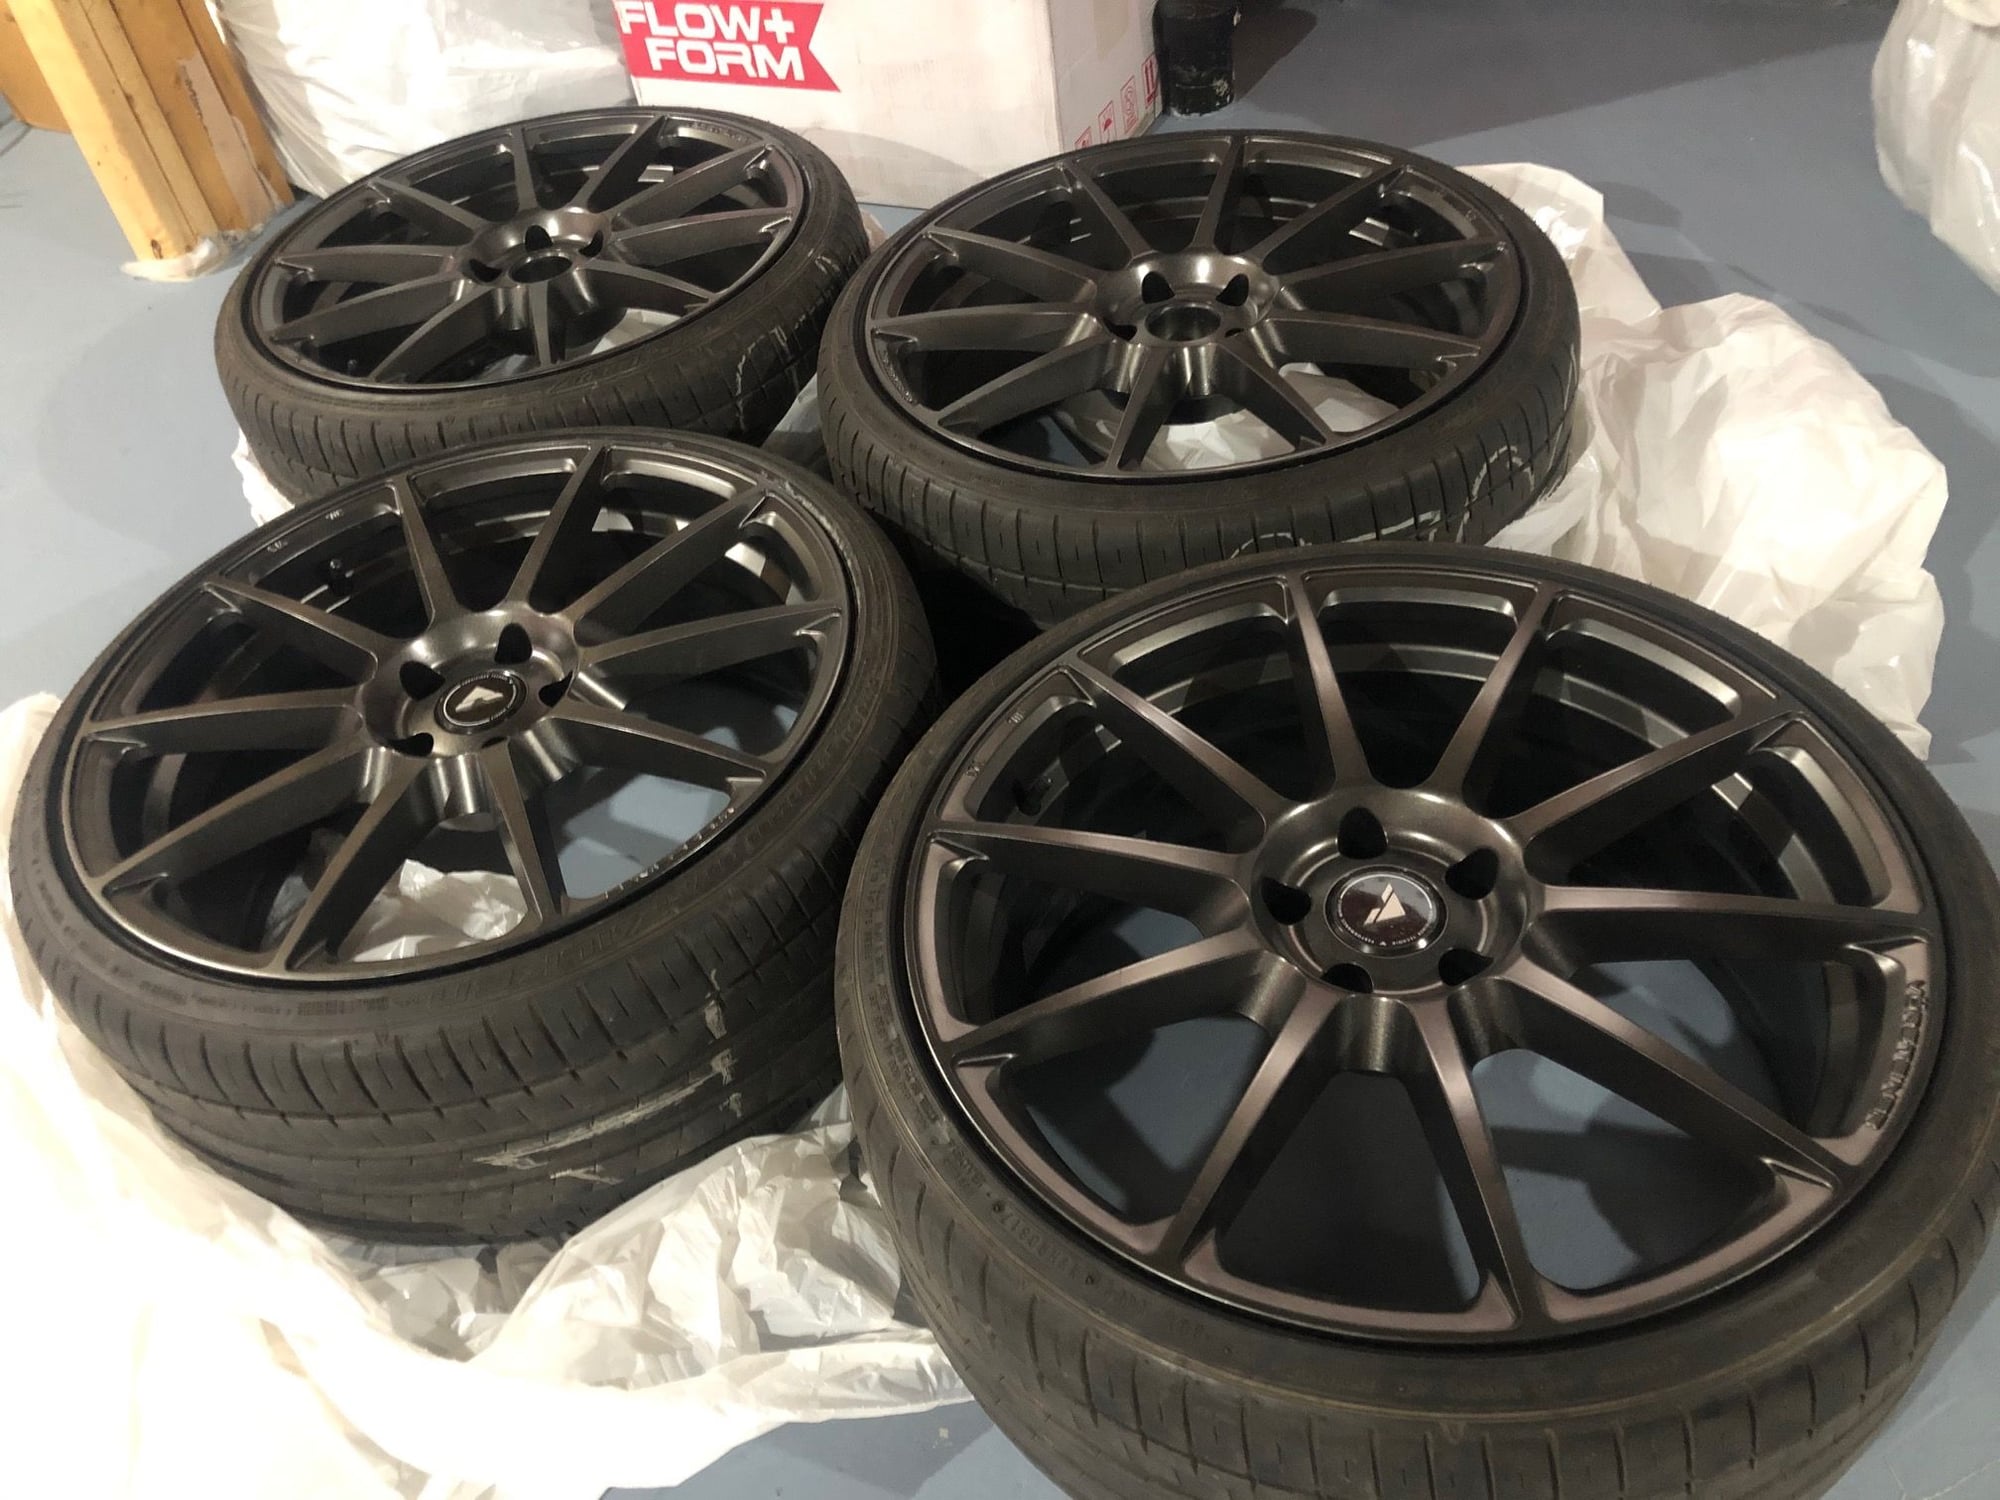 Wheels and Tires/Axles - Vorsteiner V-FF 102 Carbon Graphite 20x9 +35 5x112 - Falken FK510 - Used - 0  All Models - Toronto, ON L3R4T1, Canada